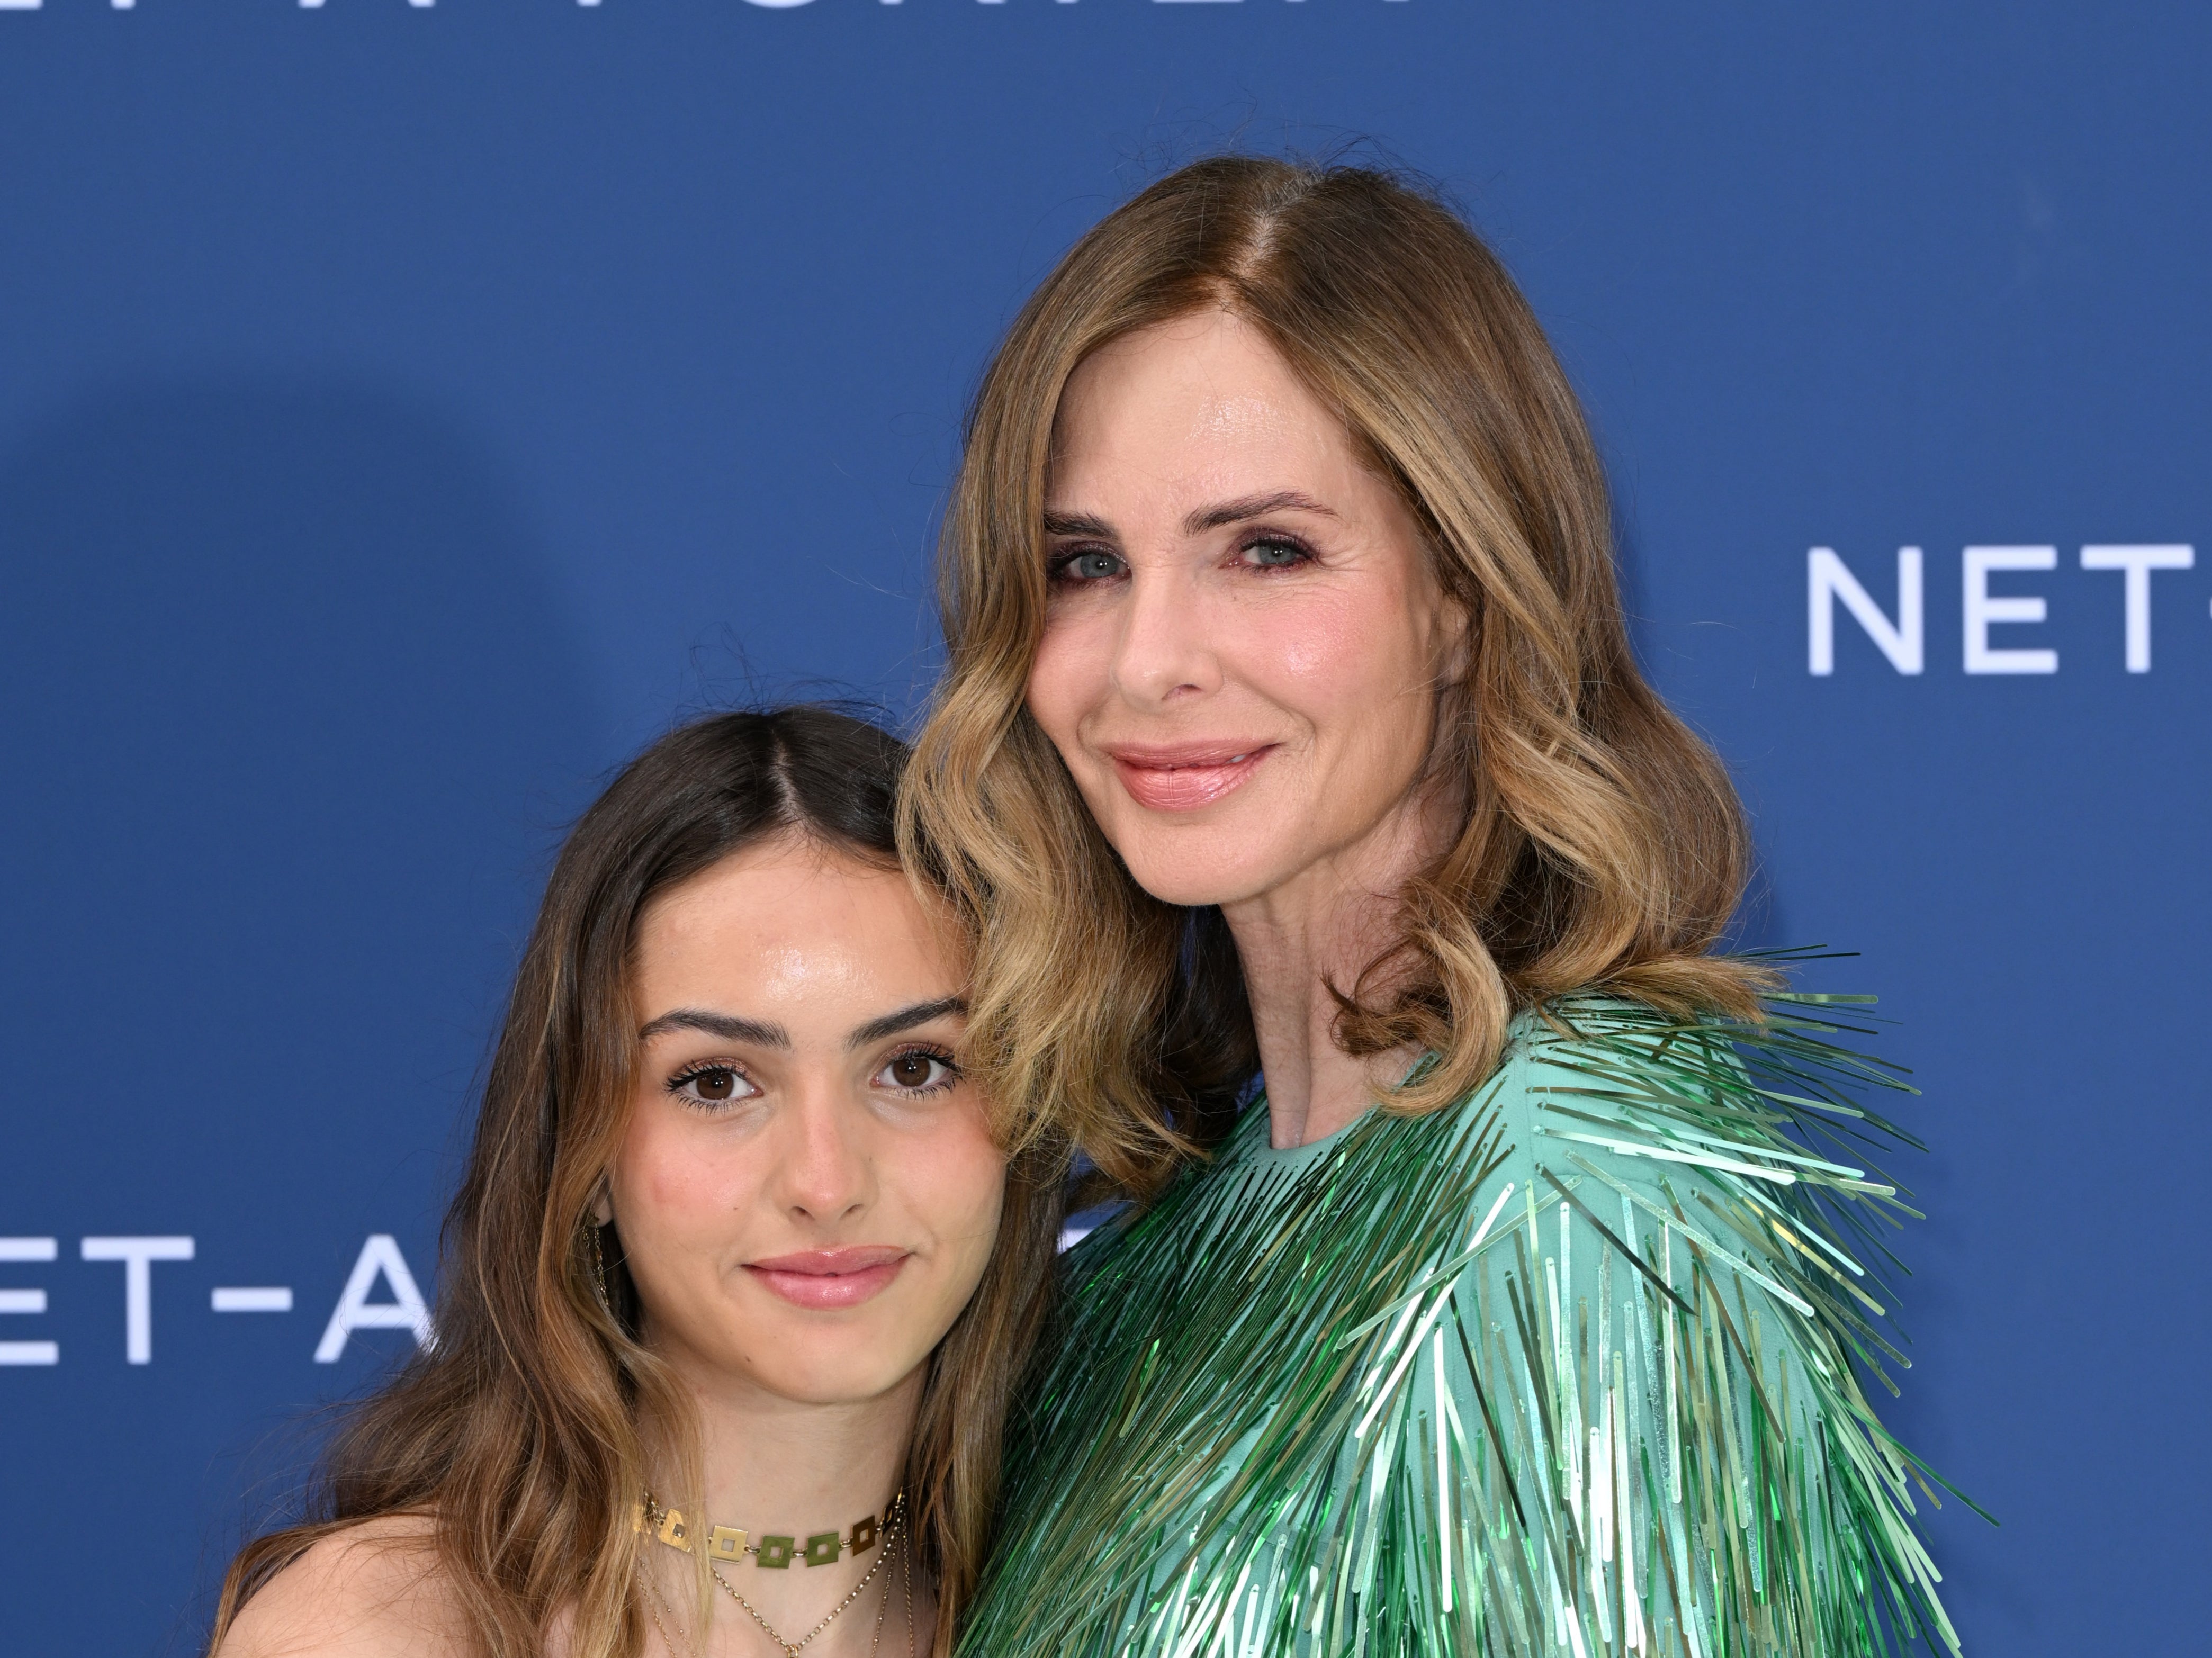 Trinny Woodall praises daughter Lyla for support in 'tough time